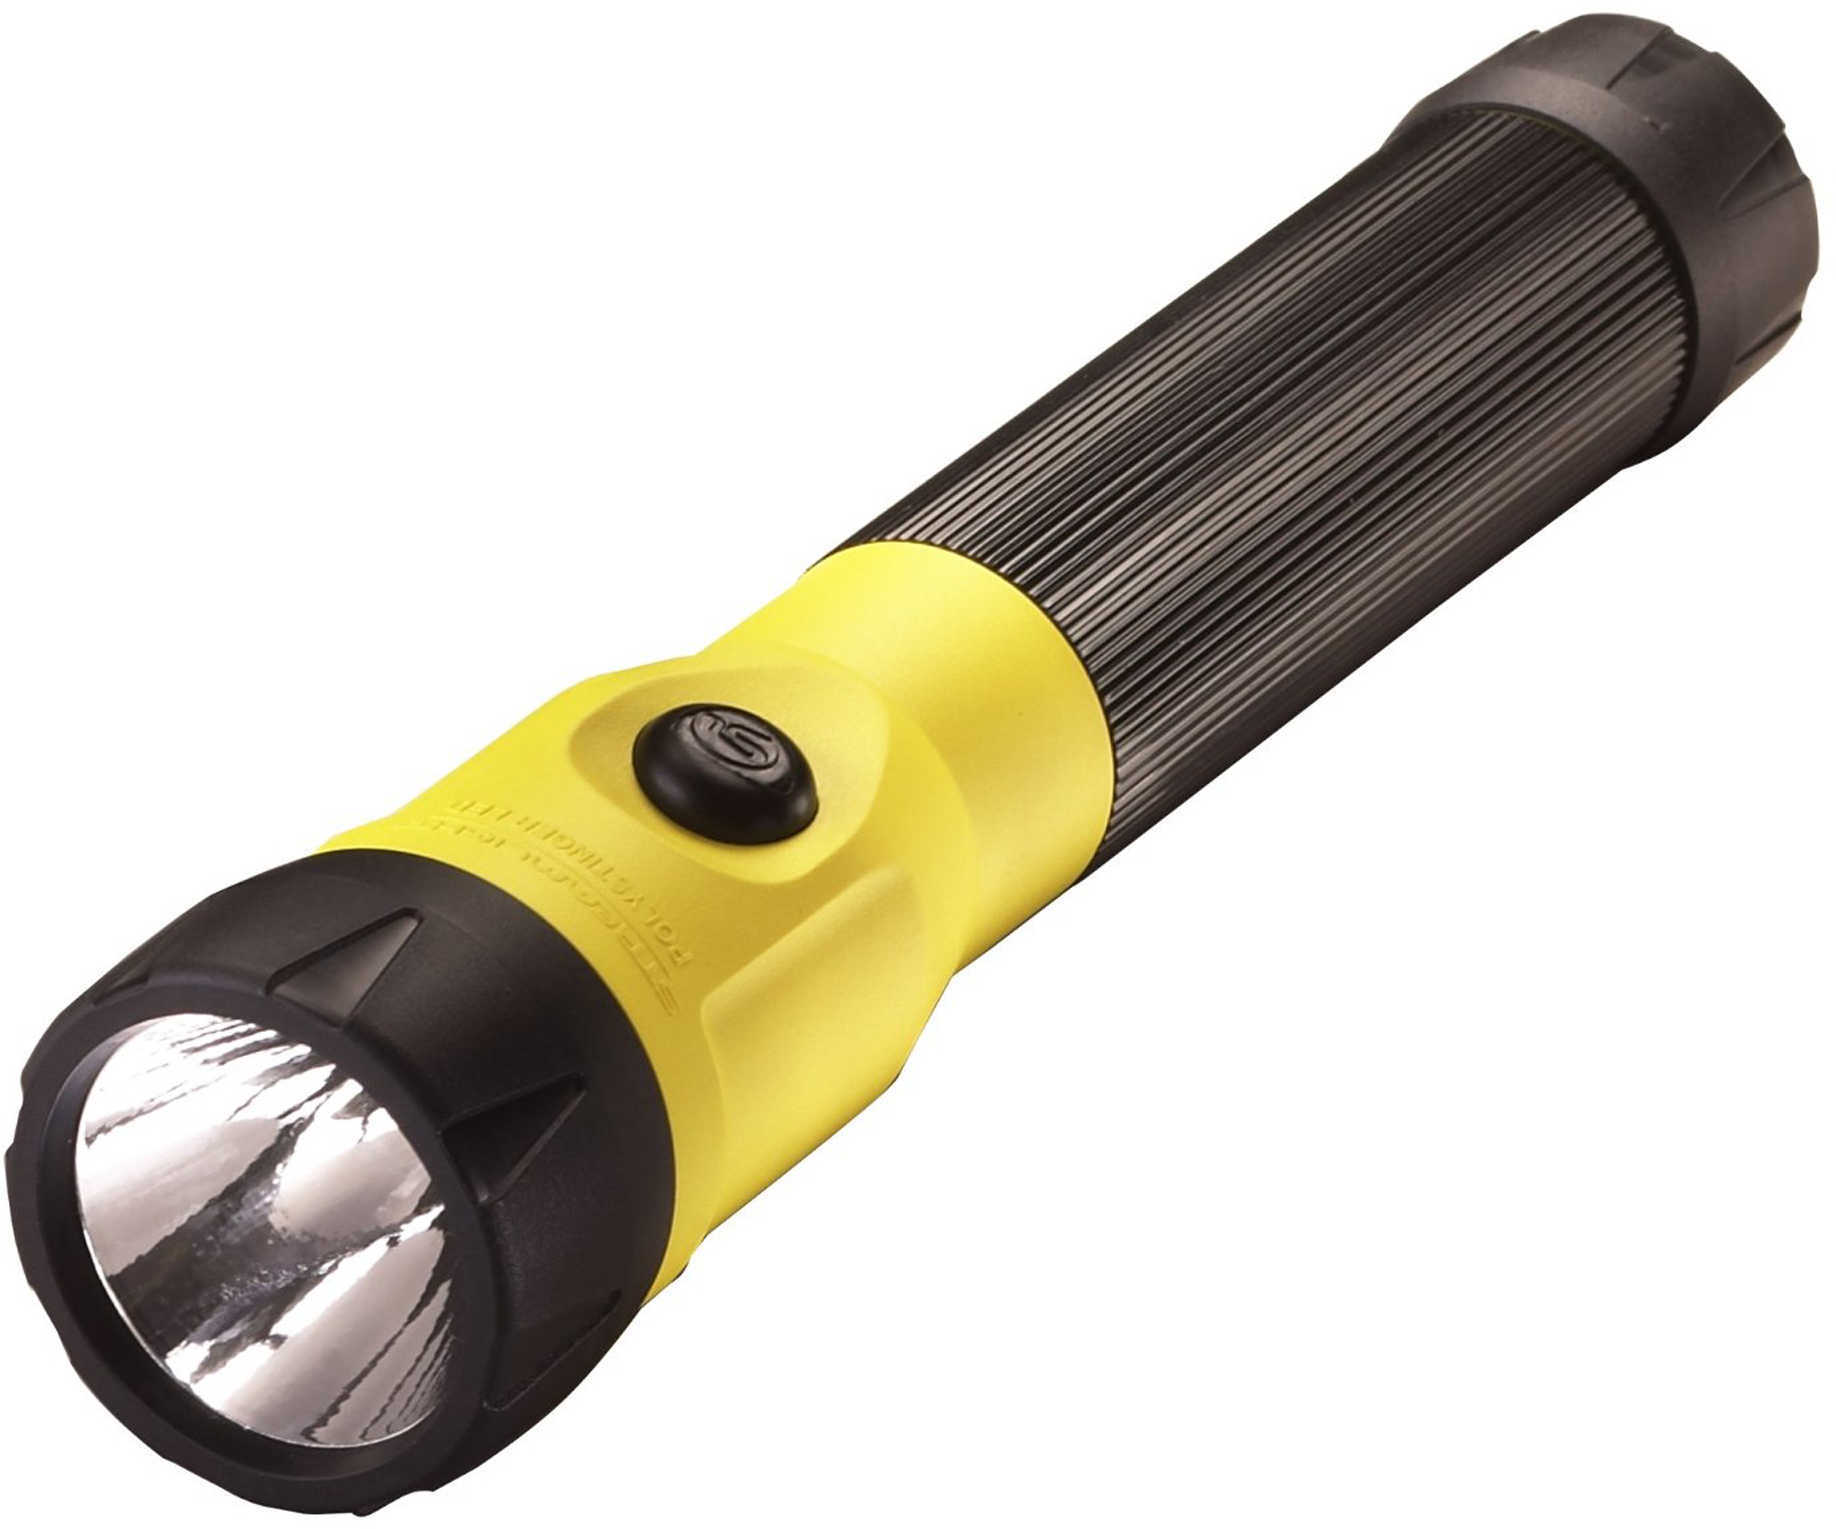 Streamlight PolyStinger LED Yellow No Charger 76160